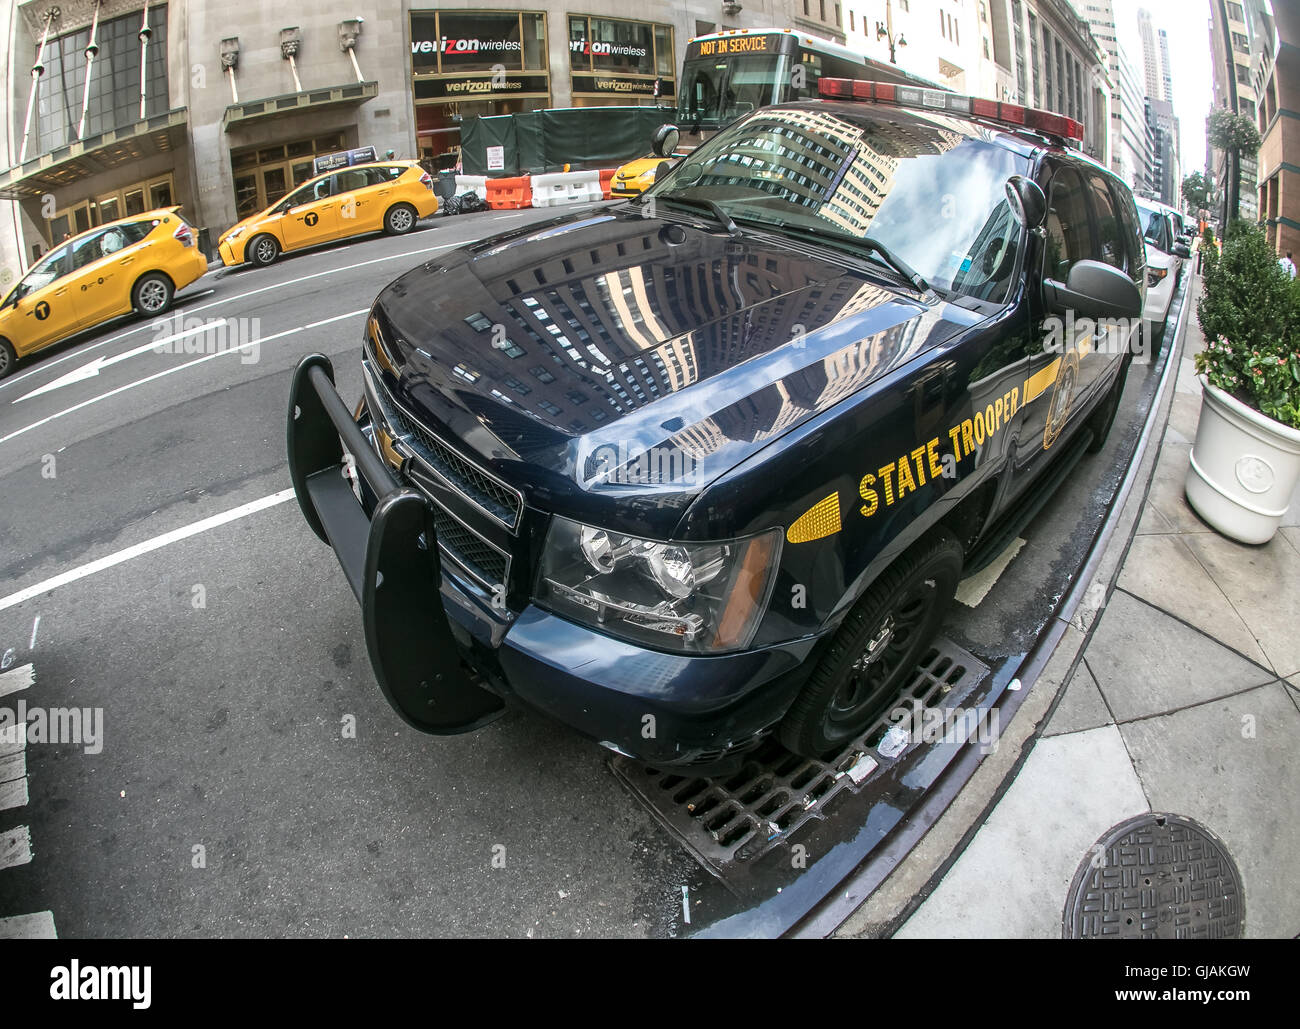 A police State Trooper car is parked near Grand Central station in Manhattan. Stock Photo